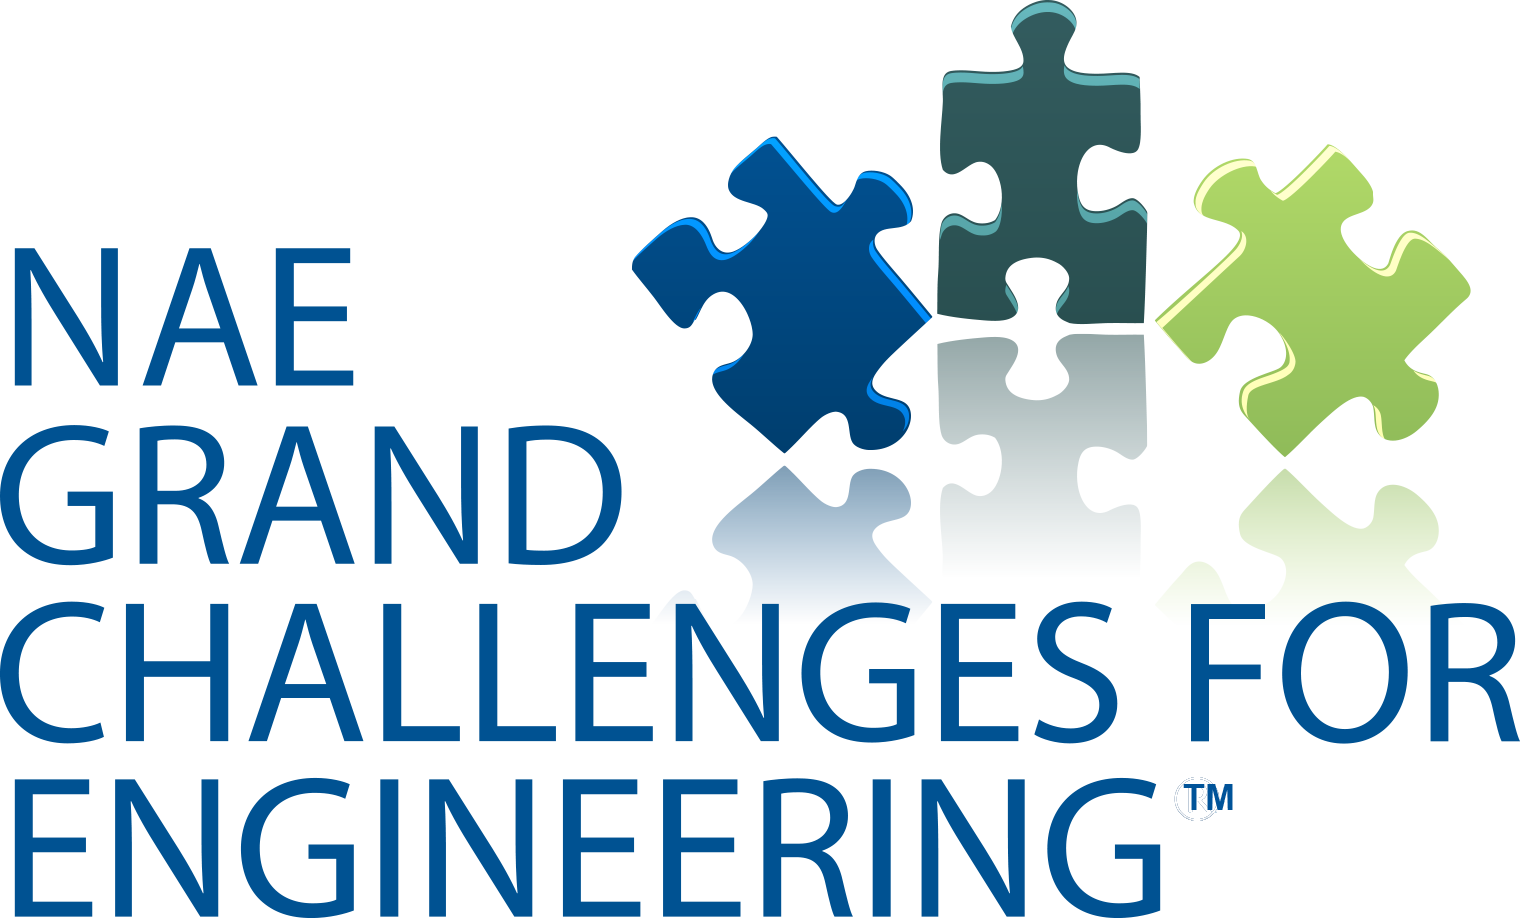 NAE Grand Challenges for Engineering Logo